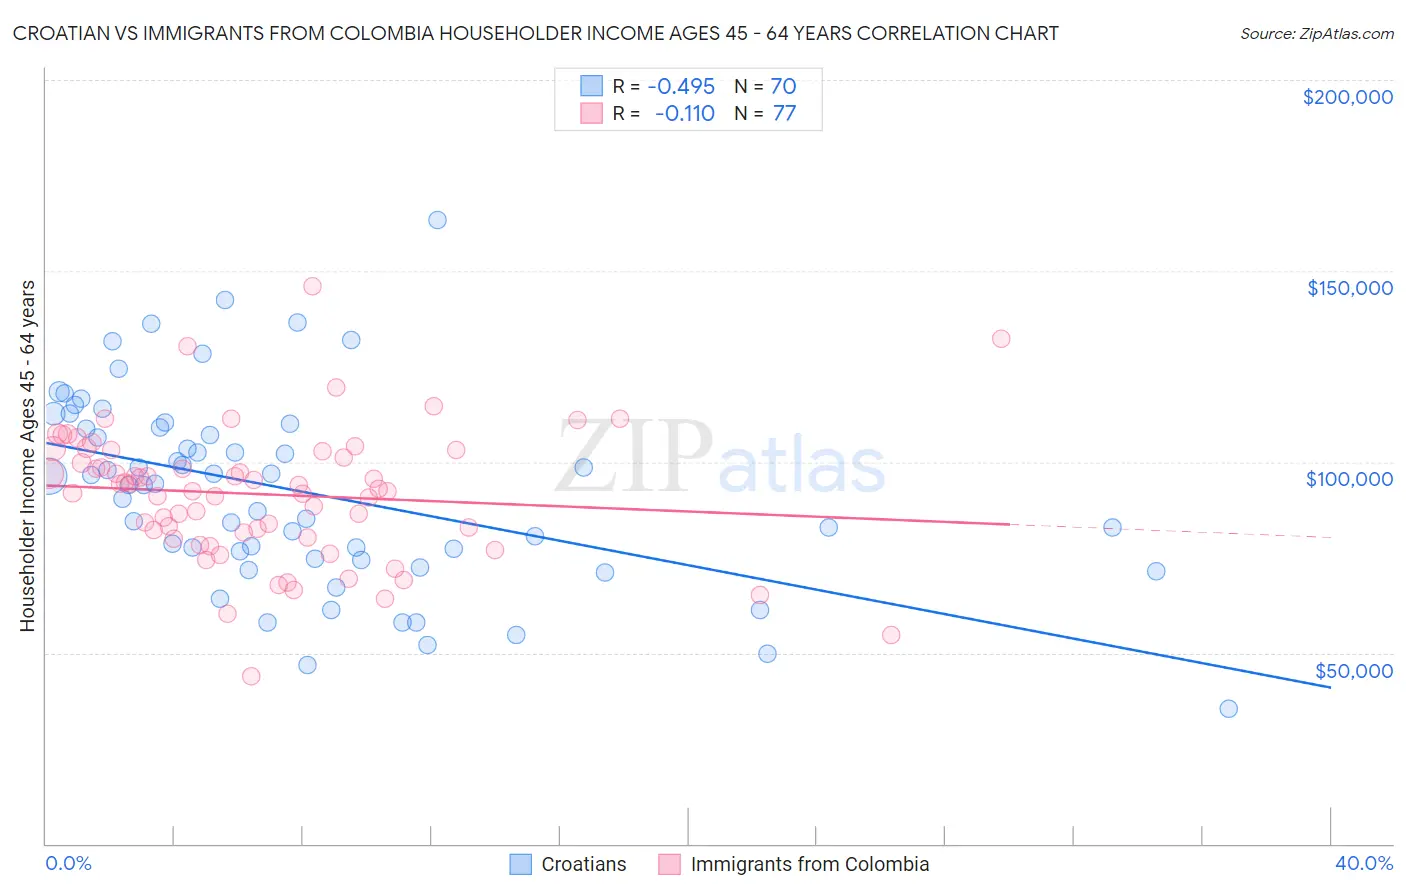 Croatian vs Immigrants from Colombia Householder Income Ages 45 - 64 years